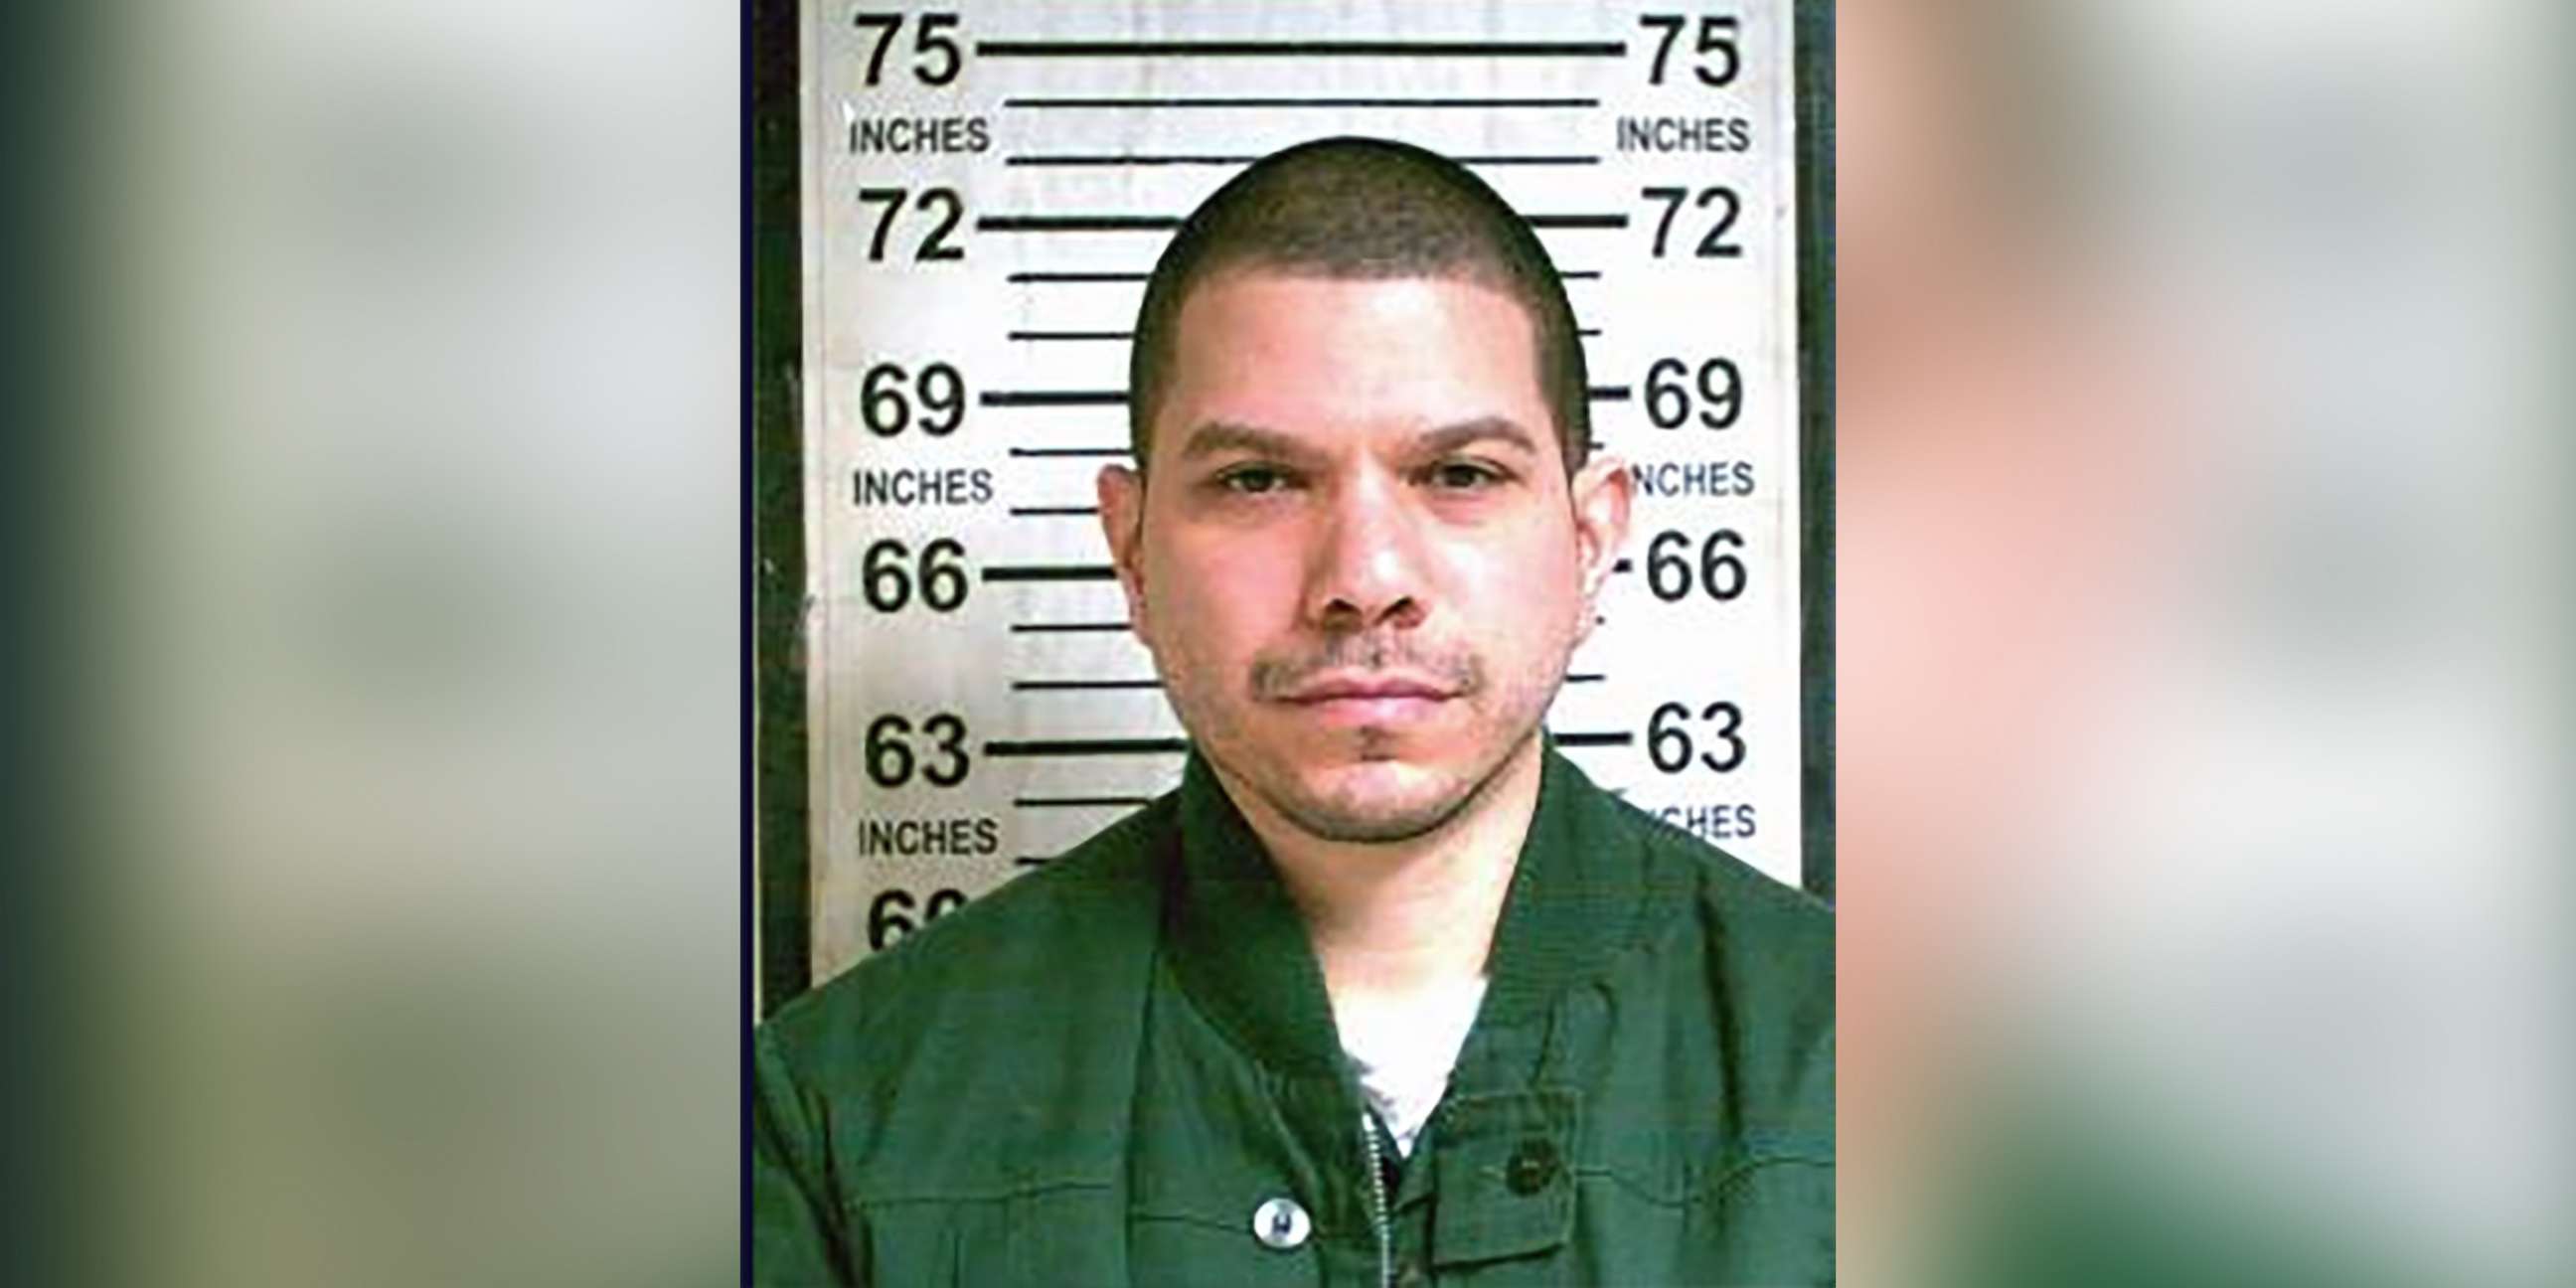 PHOTO: Bladimil Arroyo, pictured in an undated image, was released from prison on Feb. 22, 2019, after Brooklyn prosecutors found that his confession to a 2001 murder was false.